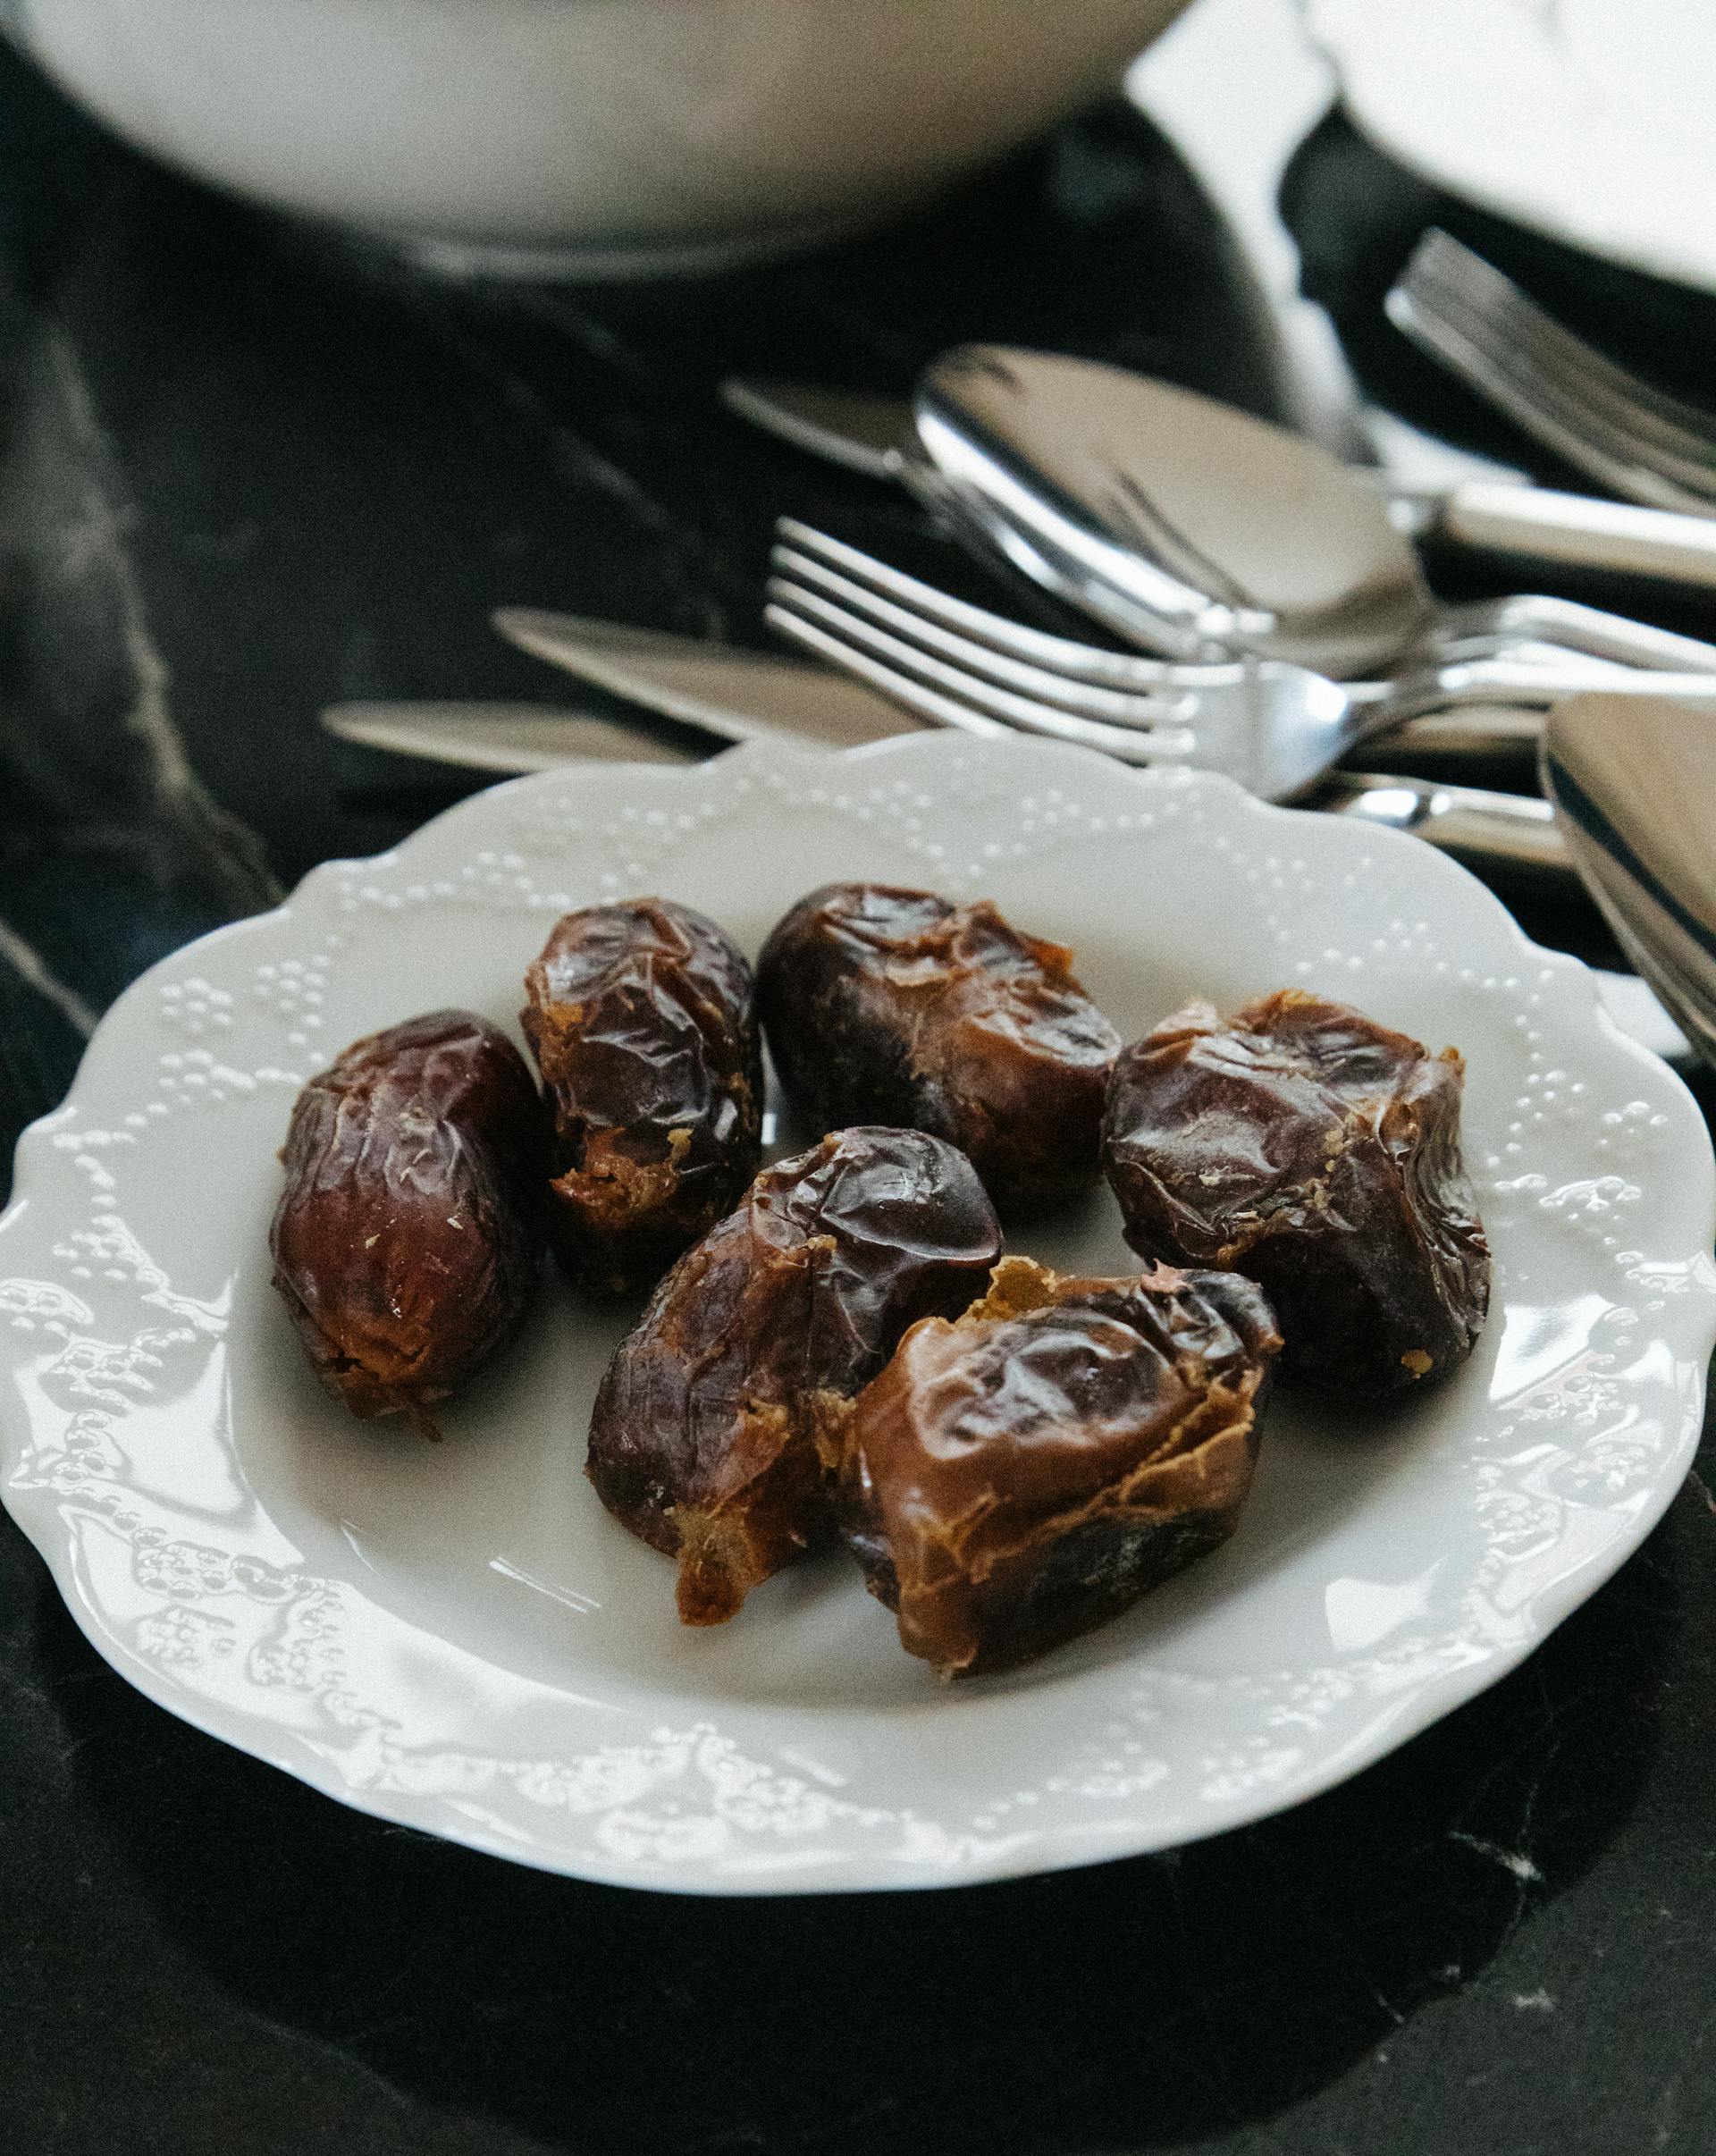 A plate of dried dates | Source: Pexels